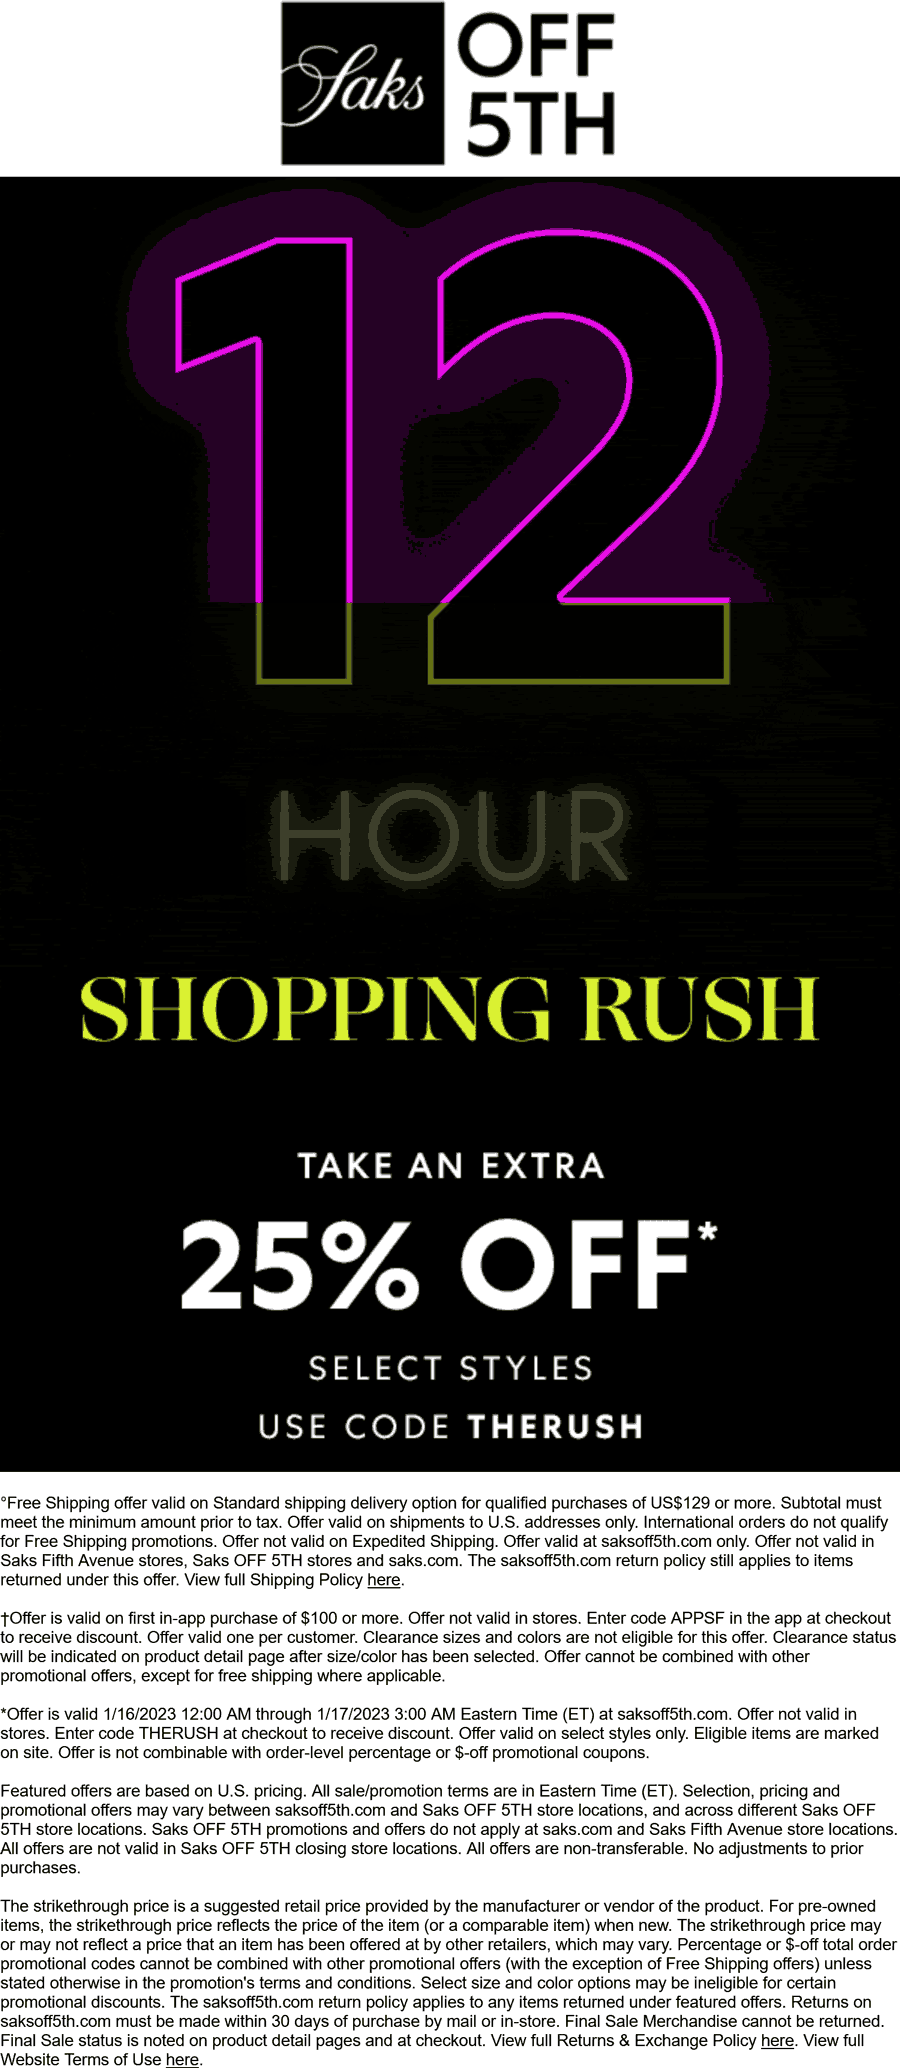 OFF 5TH stores Coupon  Extra 25% off today online at Saks OFF 5TH via promo code THERUSH #off5th 